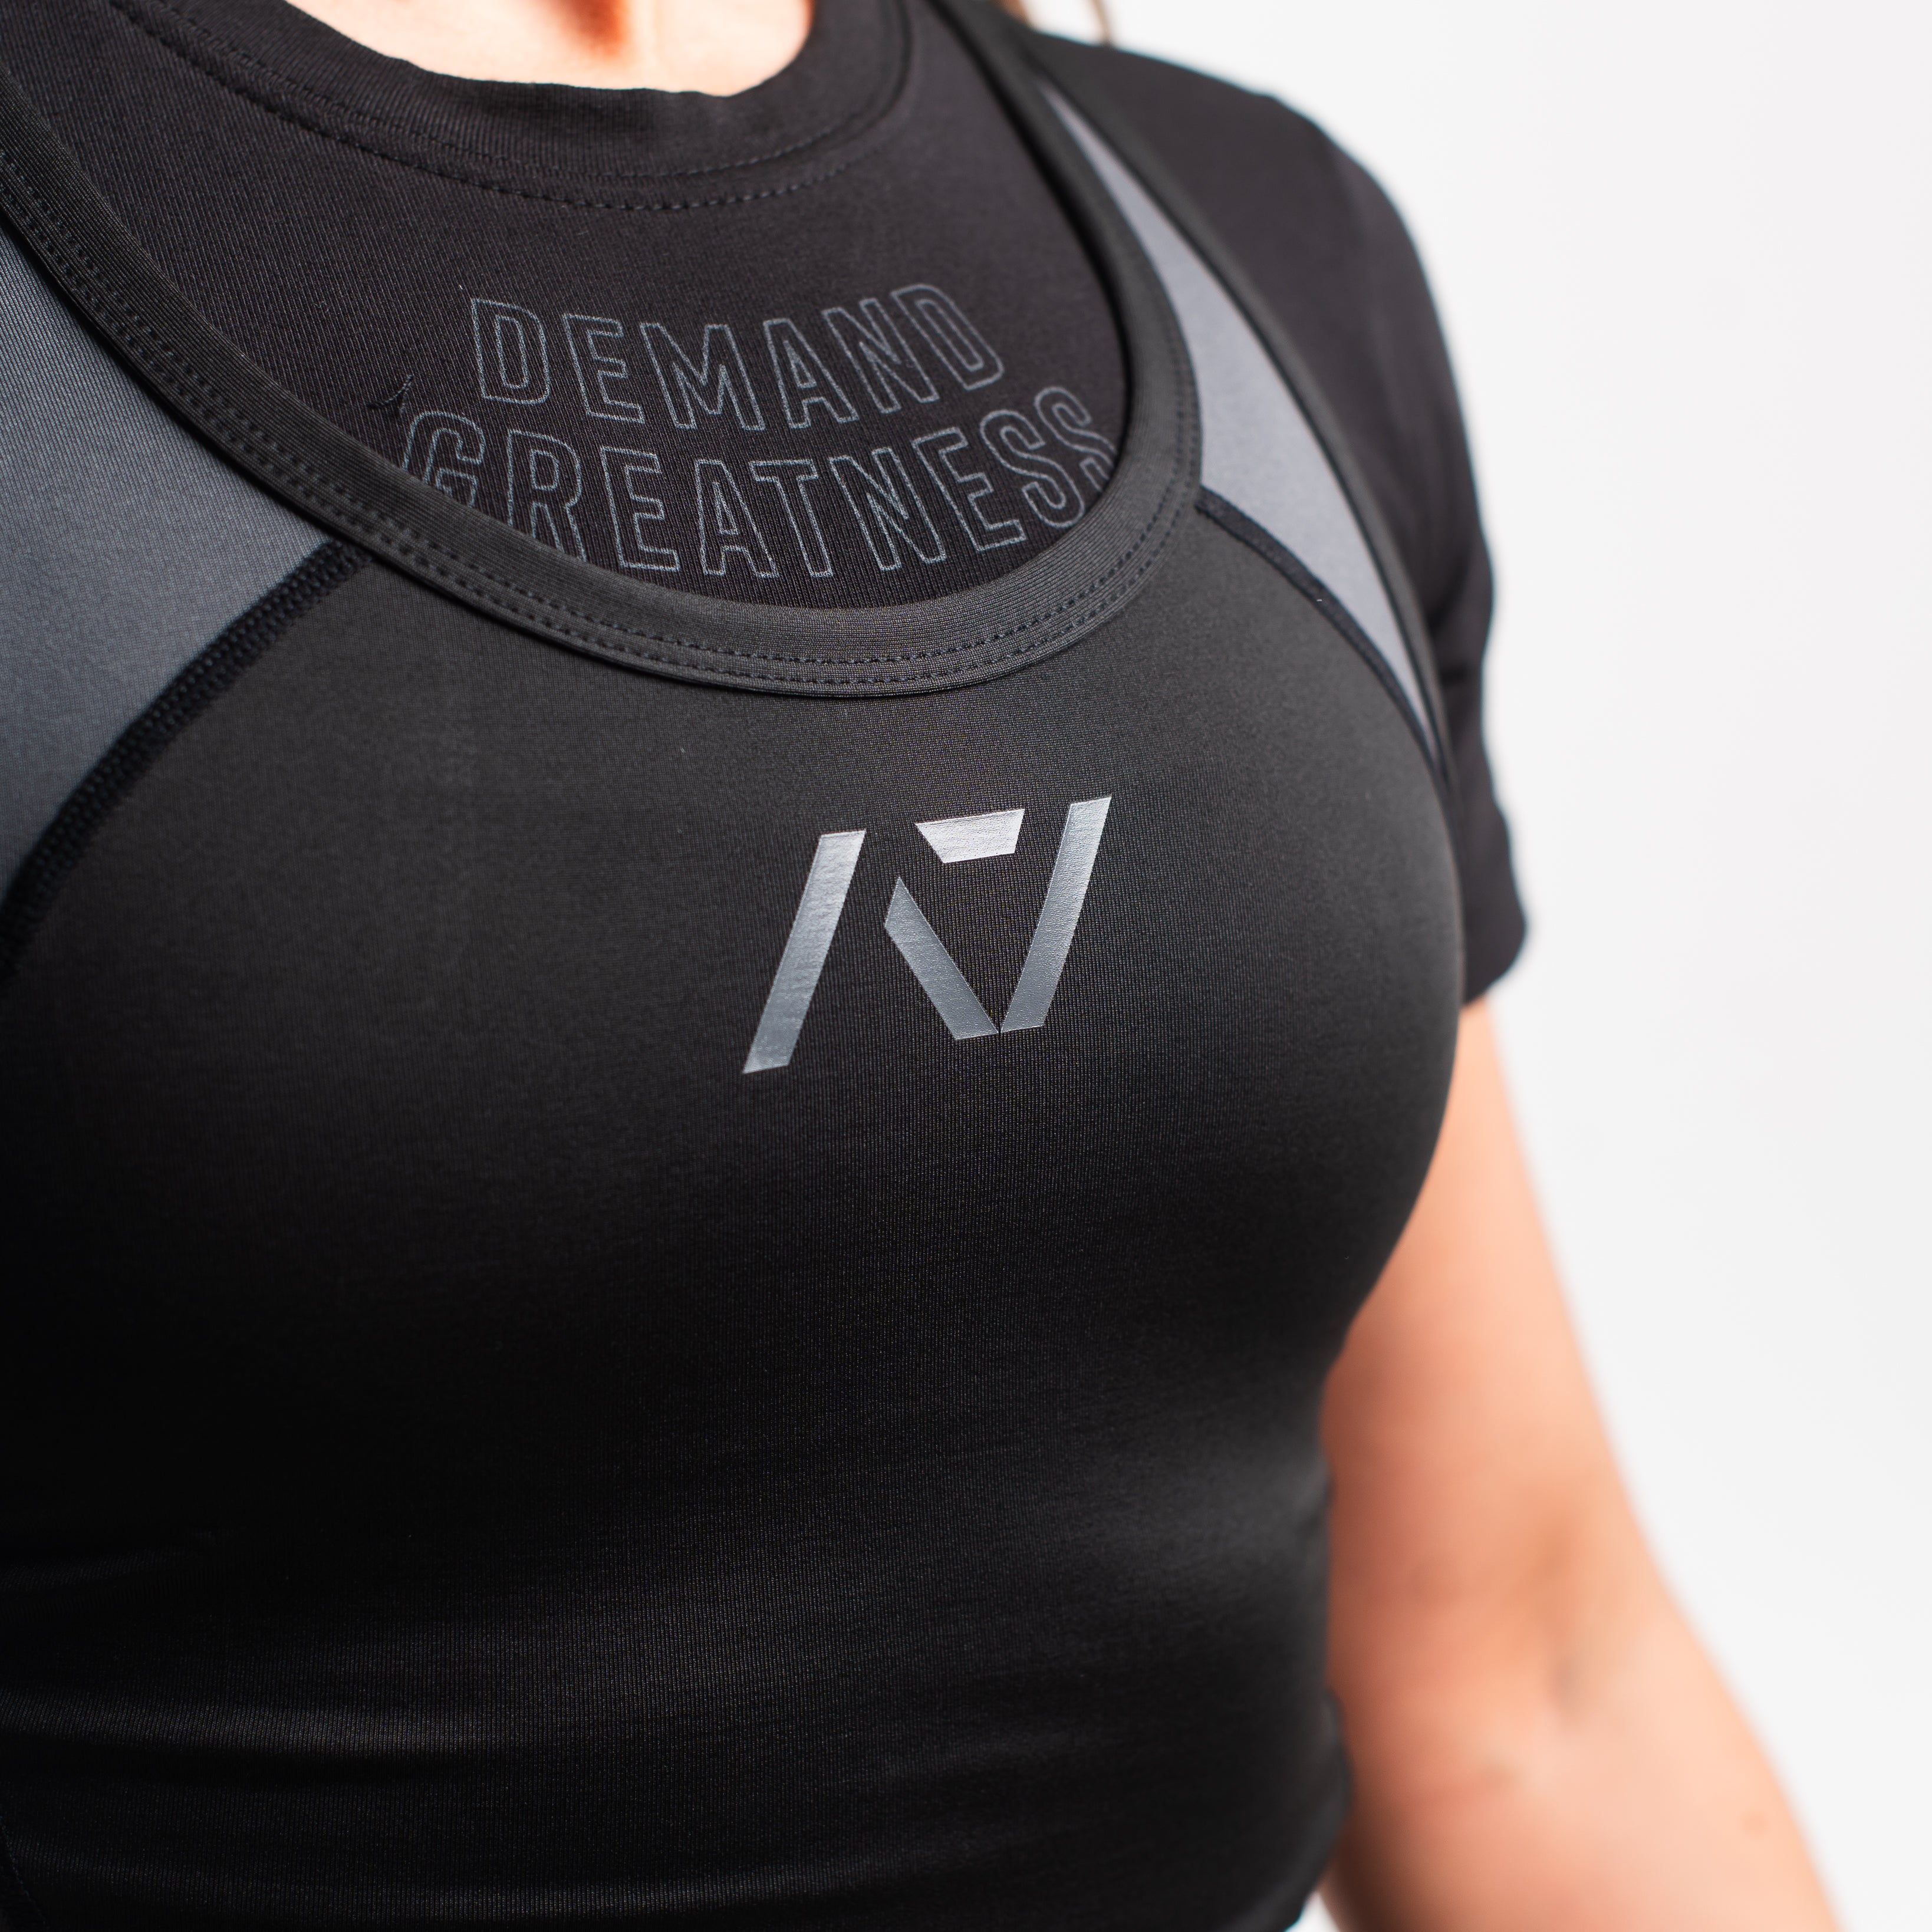 A7 IPF Approved Shadow Stone Luno singlet with extra lat mobility, side panel stitching to guide the squat depth level and curved panel design for a slimming look. The Women's singlet features a tapered waist and additional quad room. The IPF Approved Kit includes Powerlifting Singlet, A7 Meet Shirt, A7 Zebra Wrist Wraps, A7 Deadlift Socks, Hourglass Knee Sleeves (Stiff Knee Sleeves and Rigor Mortis Knee Sleeves). Genouillères powerlifting shipping to France, Spain, Ireland, Germany, Italy, Sweden and EU.